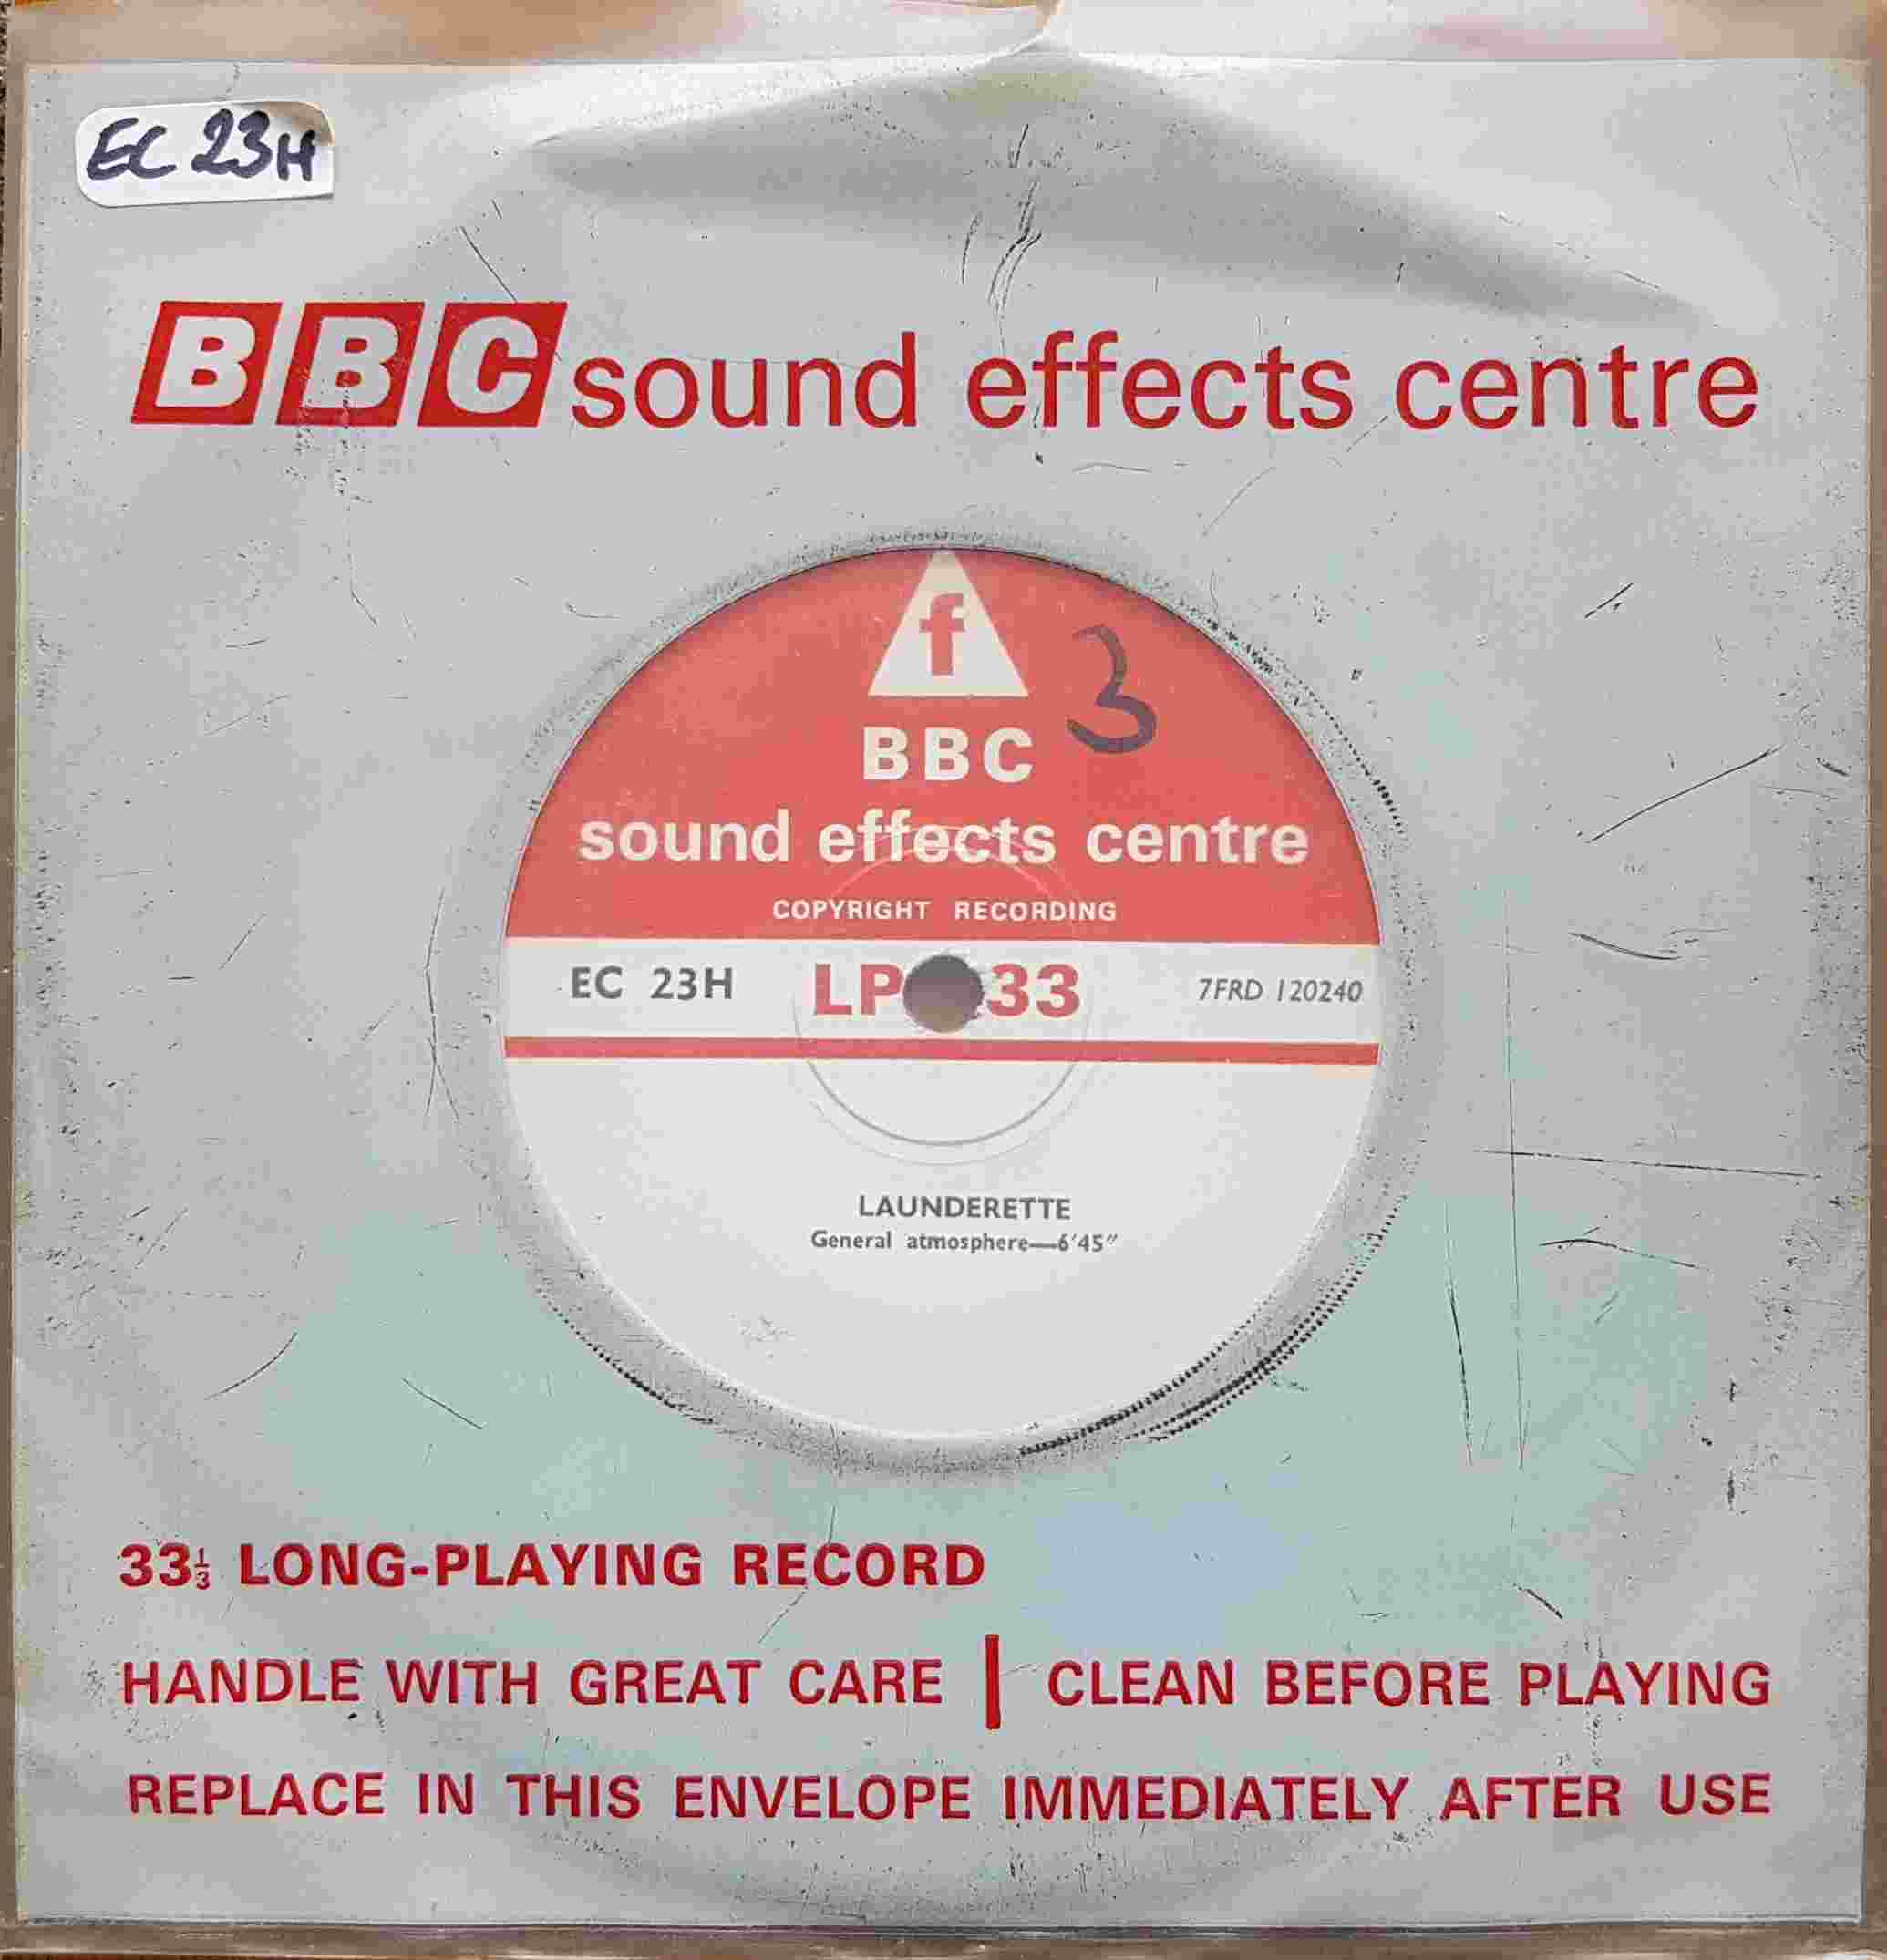 Picture of EC 23H Launderette by artist Not registered from the BBC records and Tapes library